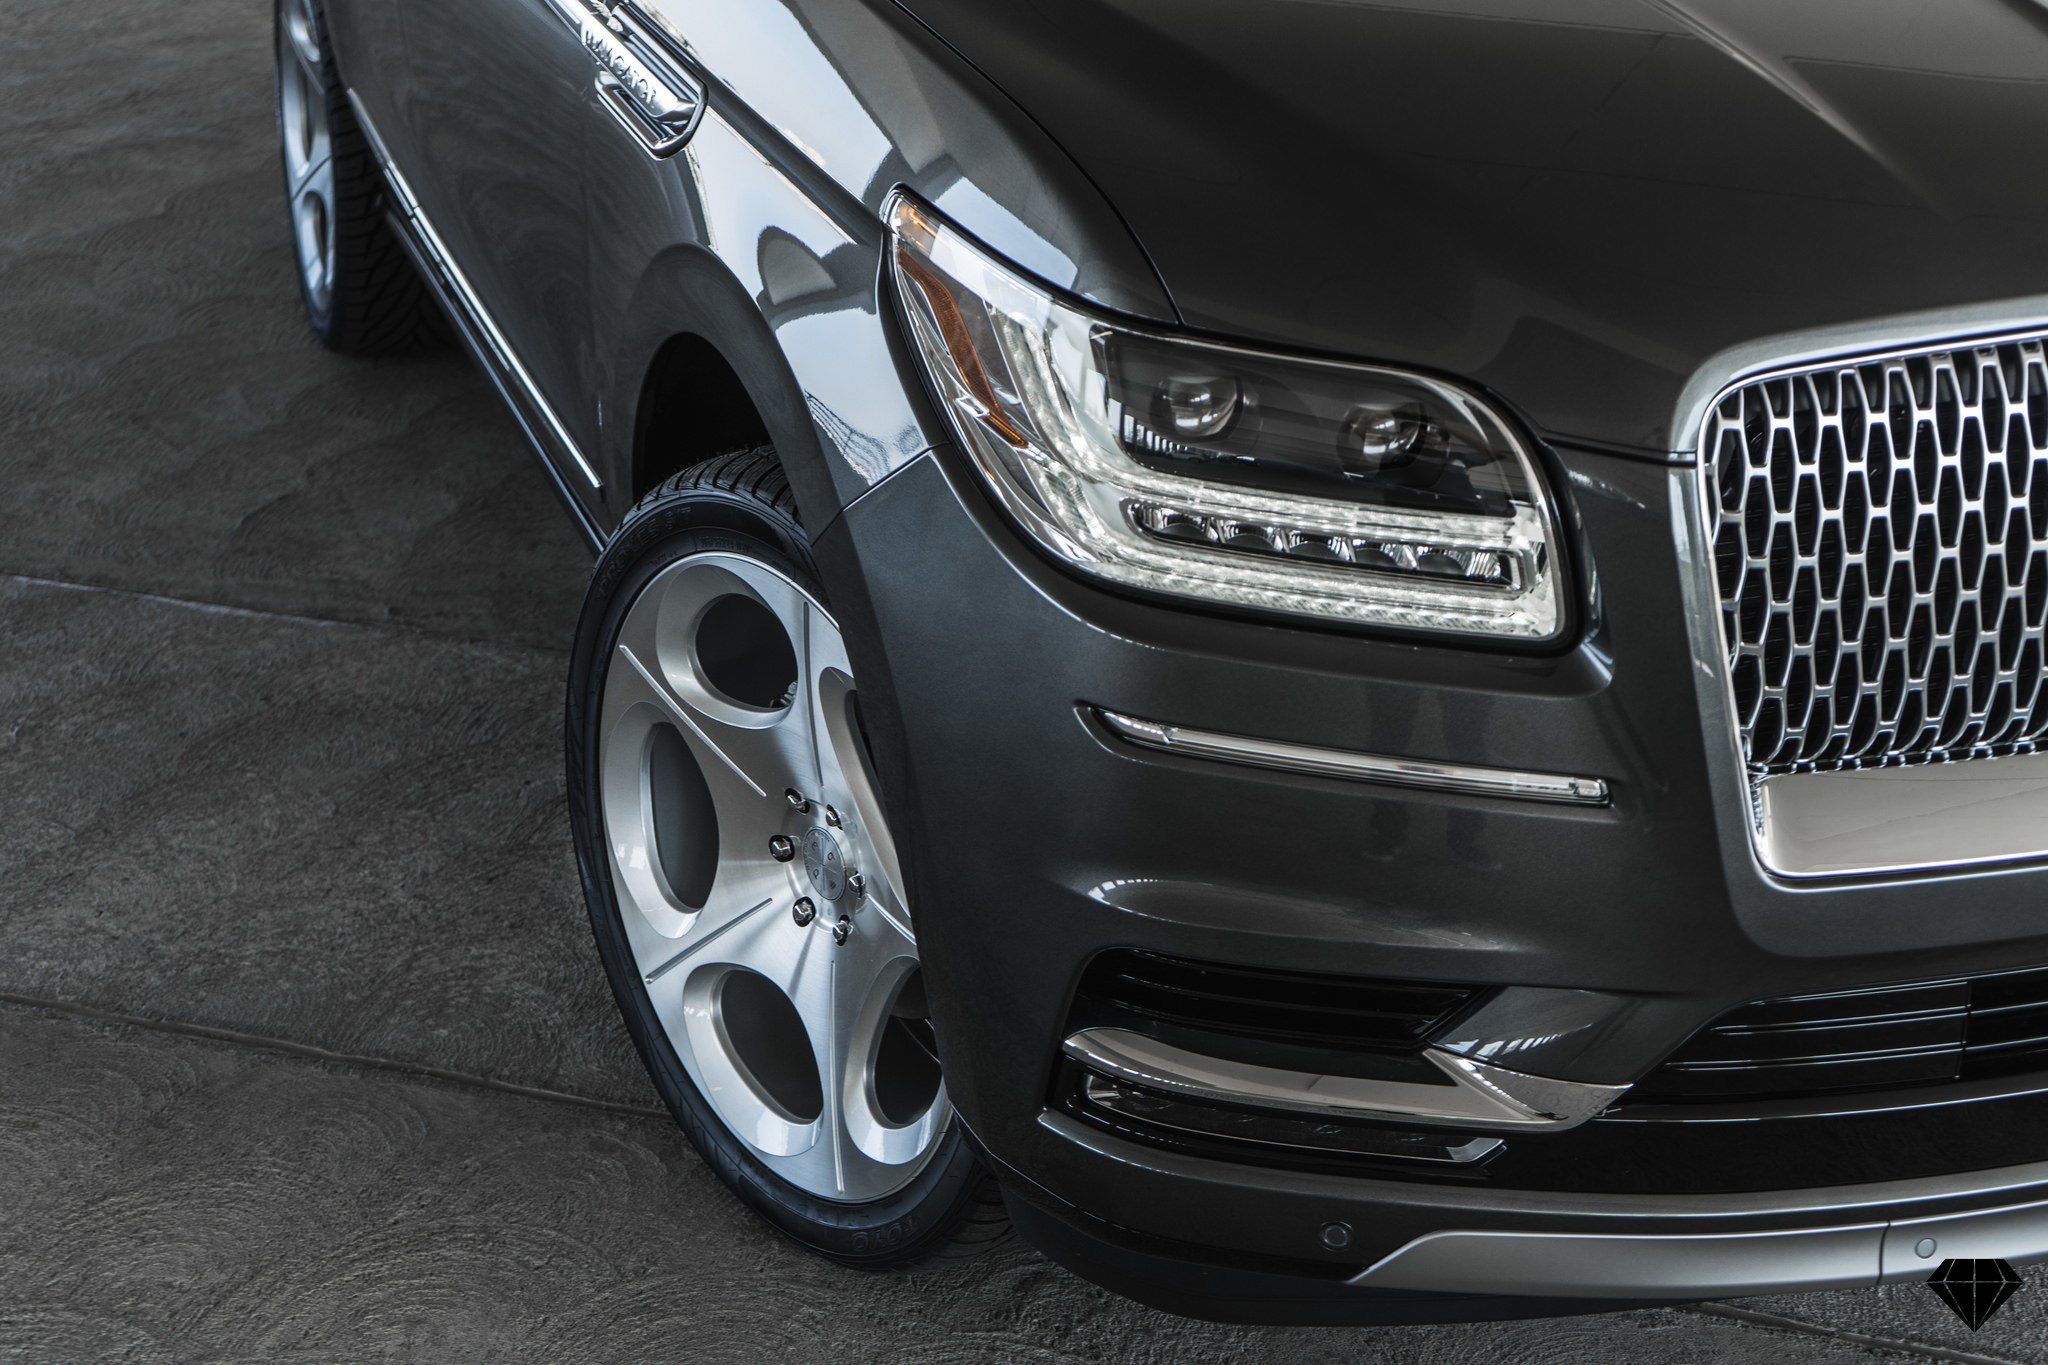 Aftermarket Front Bumper on Gray Lincoln Navigator - Photo by Blaque Diamond Wheels